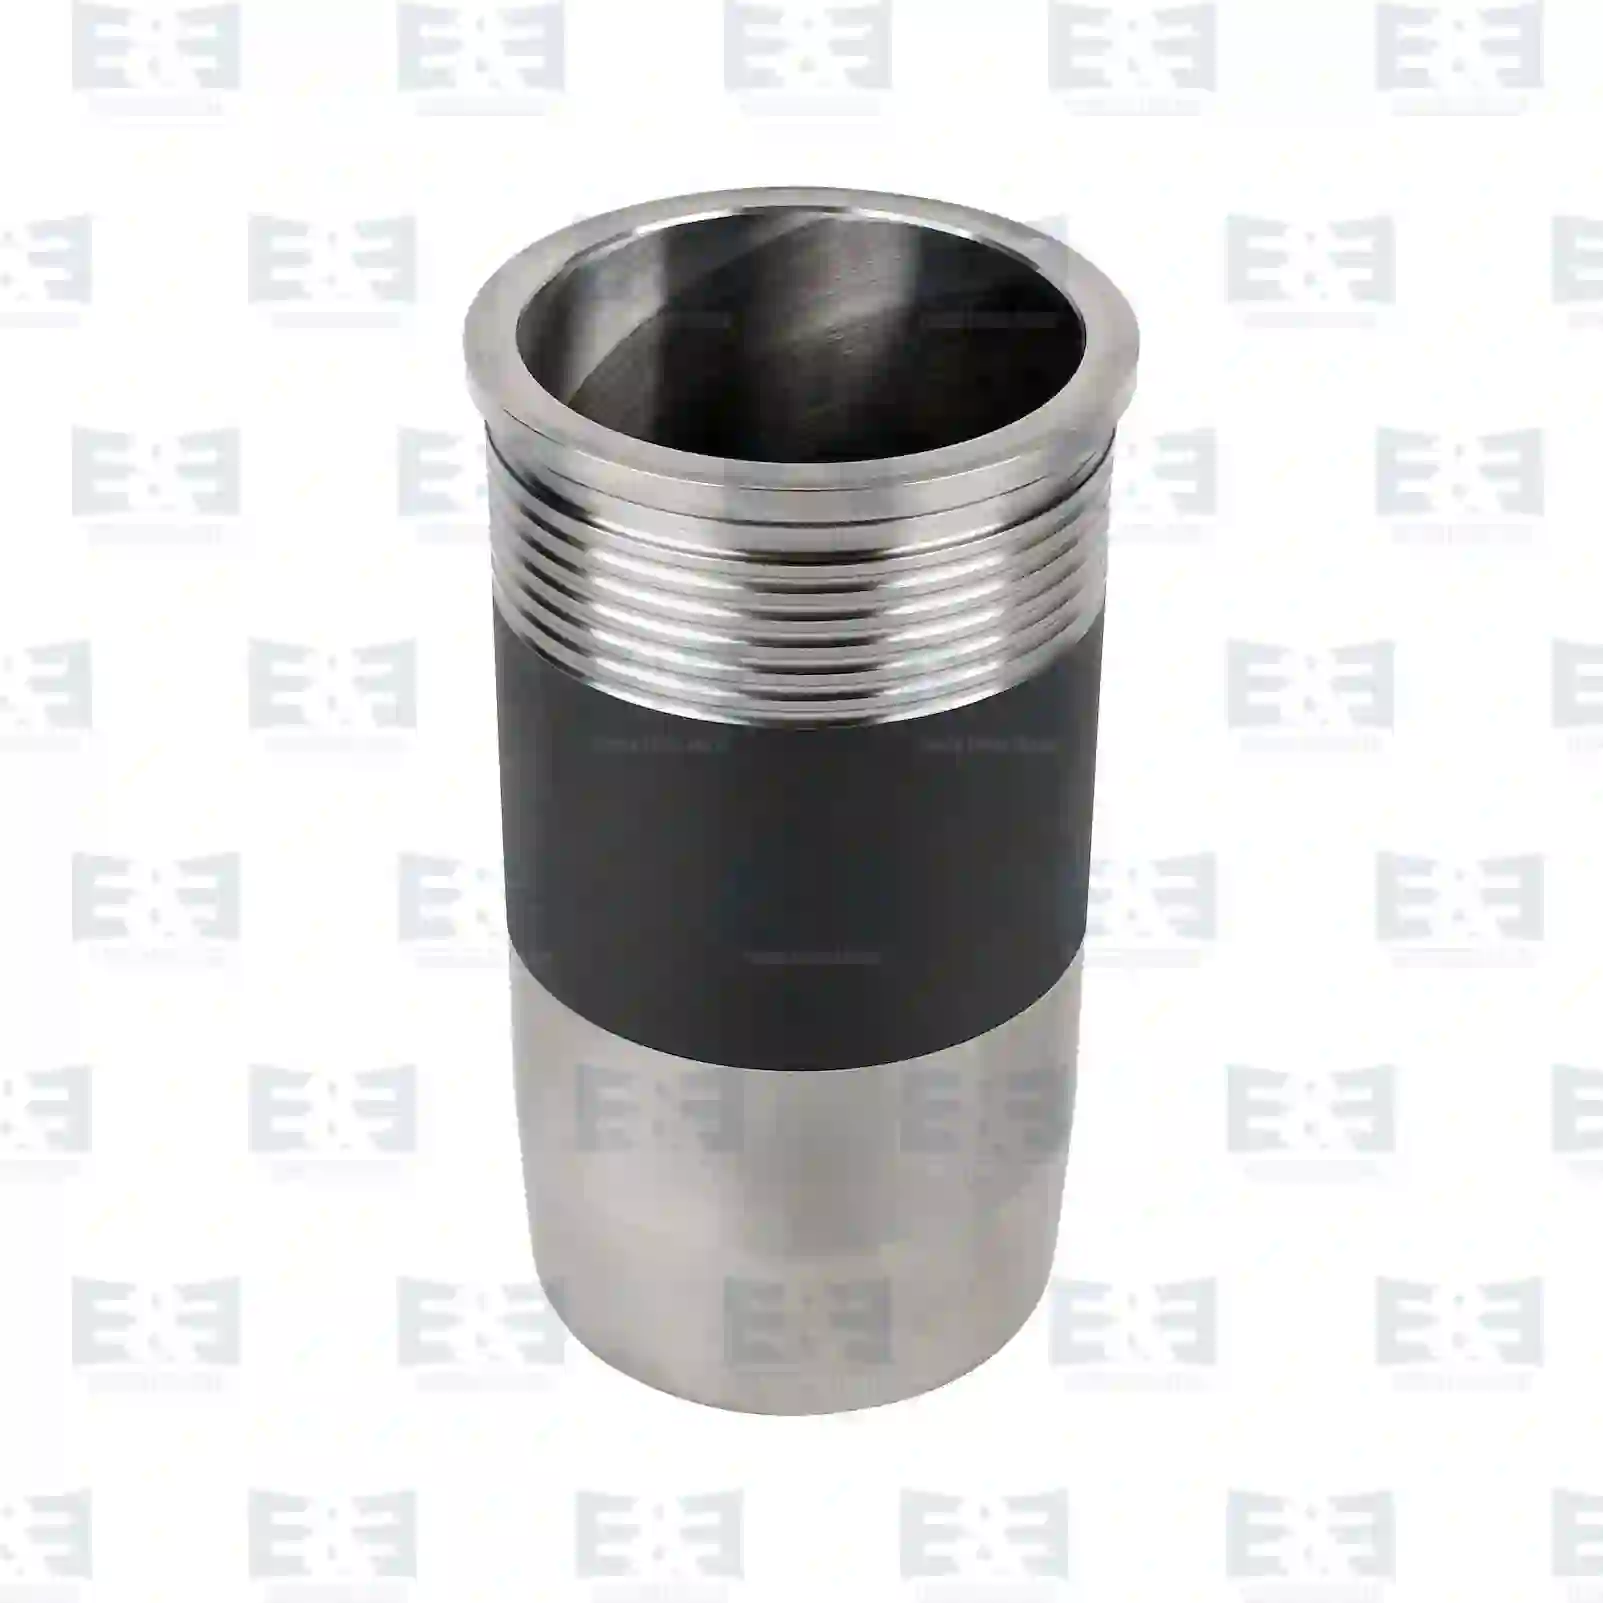 Cylinder liner, without seal rings, 2E2209581, 51012010406, 51012010435, 51012010436, 51012010437, 51012010451, 51012010452 ||  2E2209581 E&E Truck Spare Parts | Truck Spare Parts, Auotomotive Spare Parts Cylinder liner, without seal rings, 2E2209581, 51012010406, 51012010435, 51012010436, 51012010437, 51012010451, 51012010452 ||  2E2209581 E&E Truck Spare Parts | Truck Spare Parts, Auotomotive Spare Parts